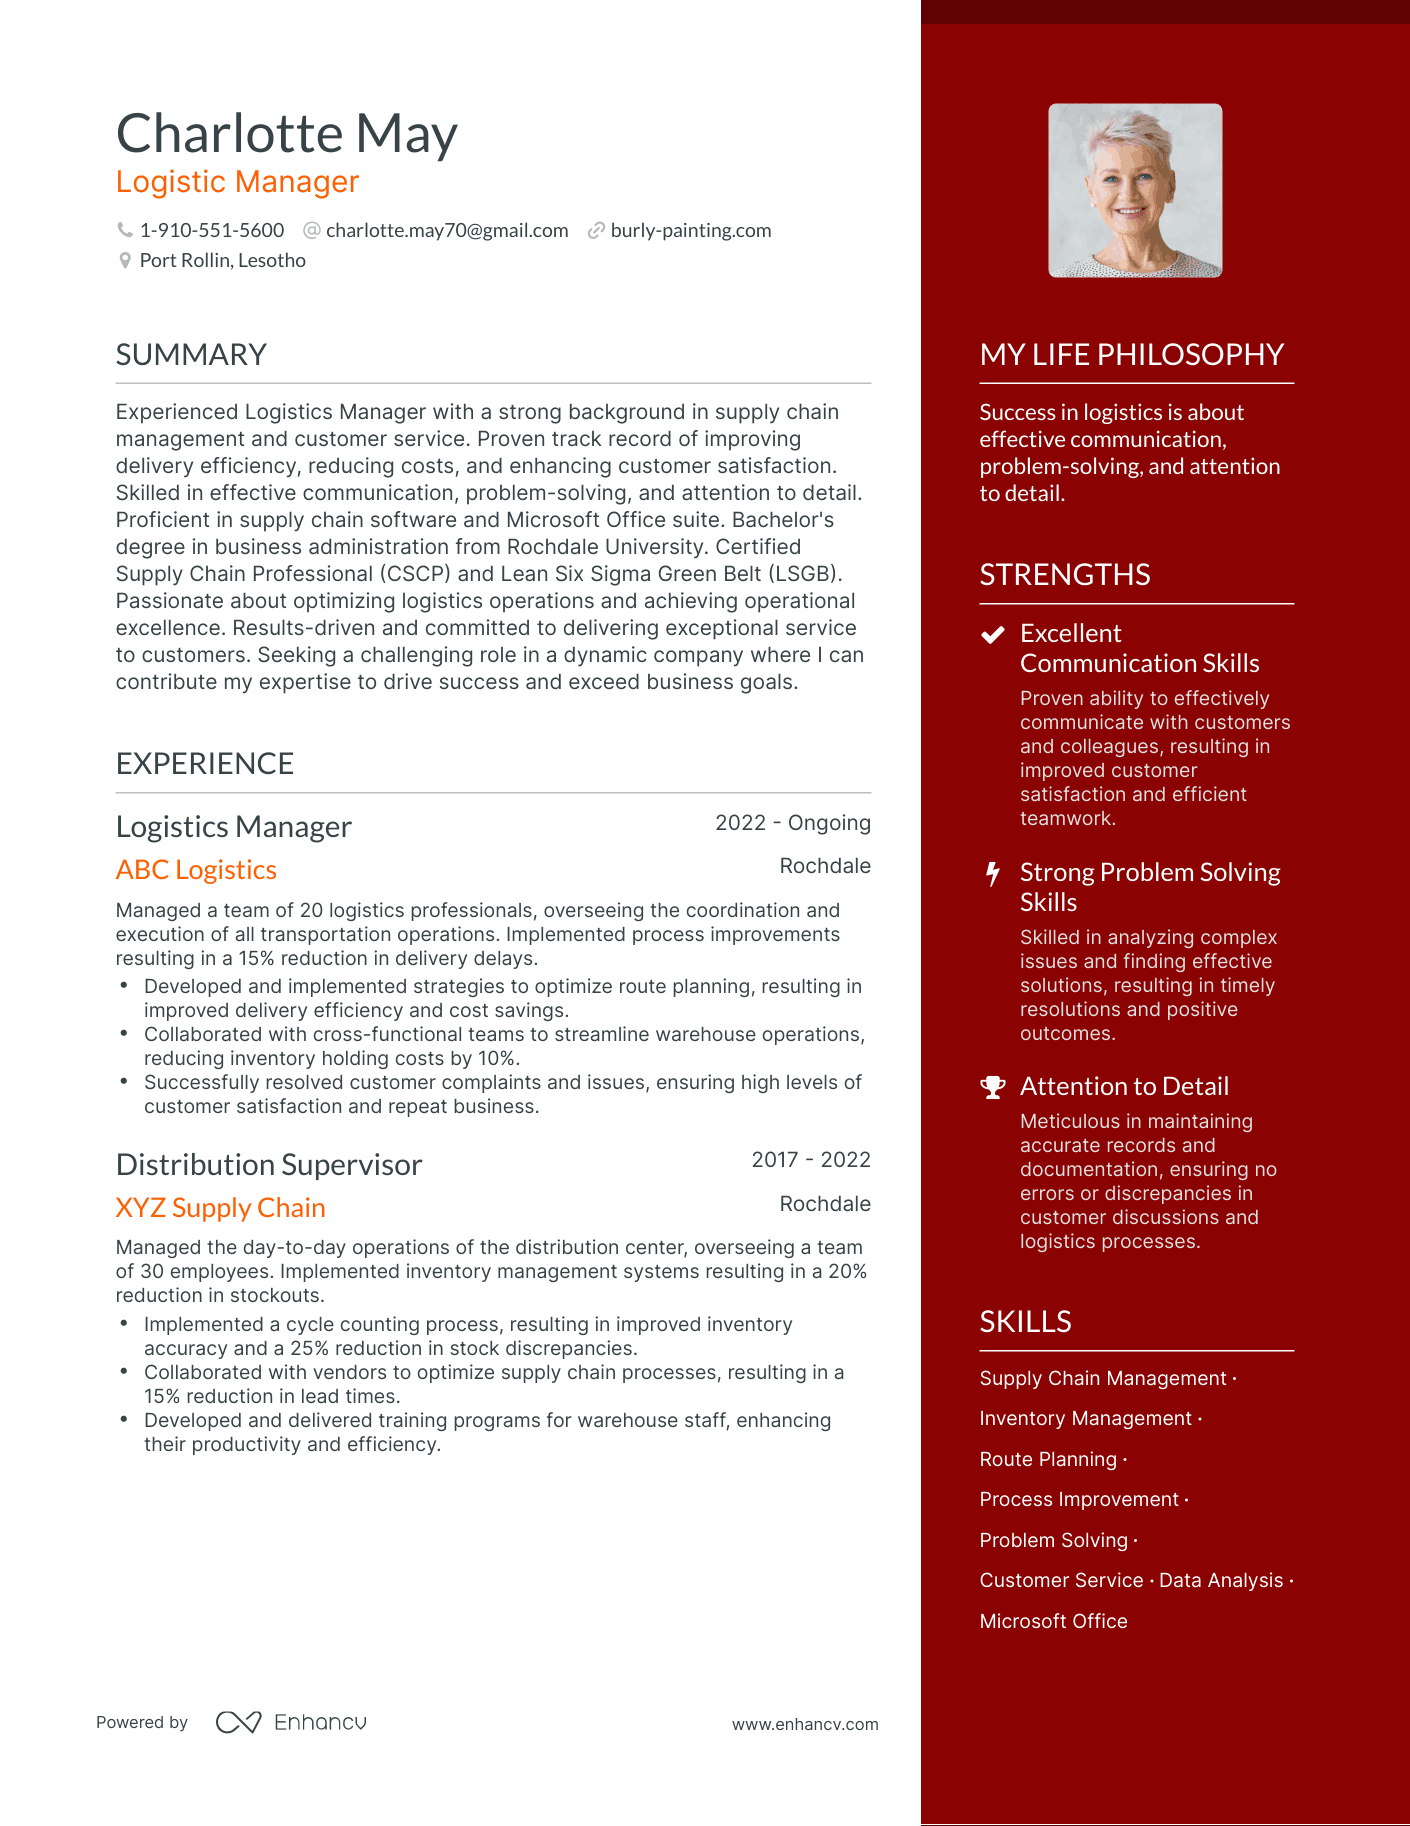 Logistic Manager resume example